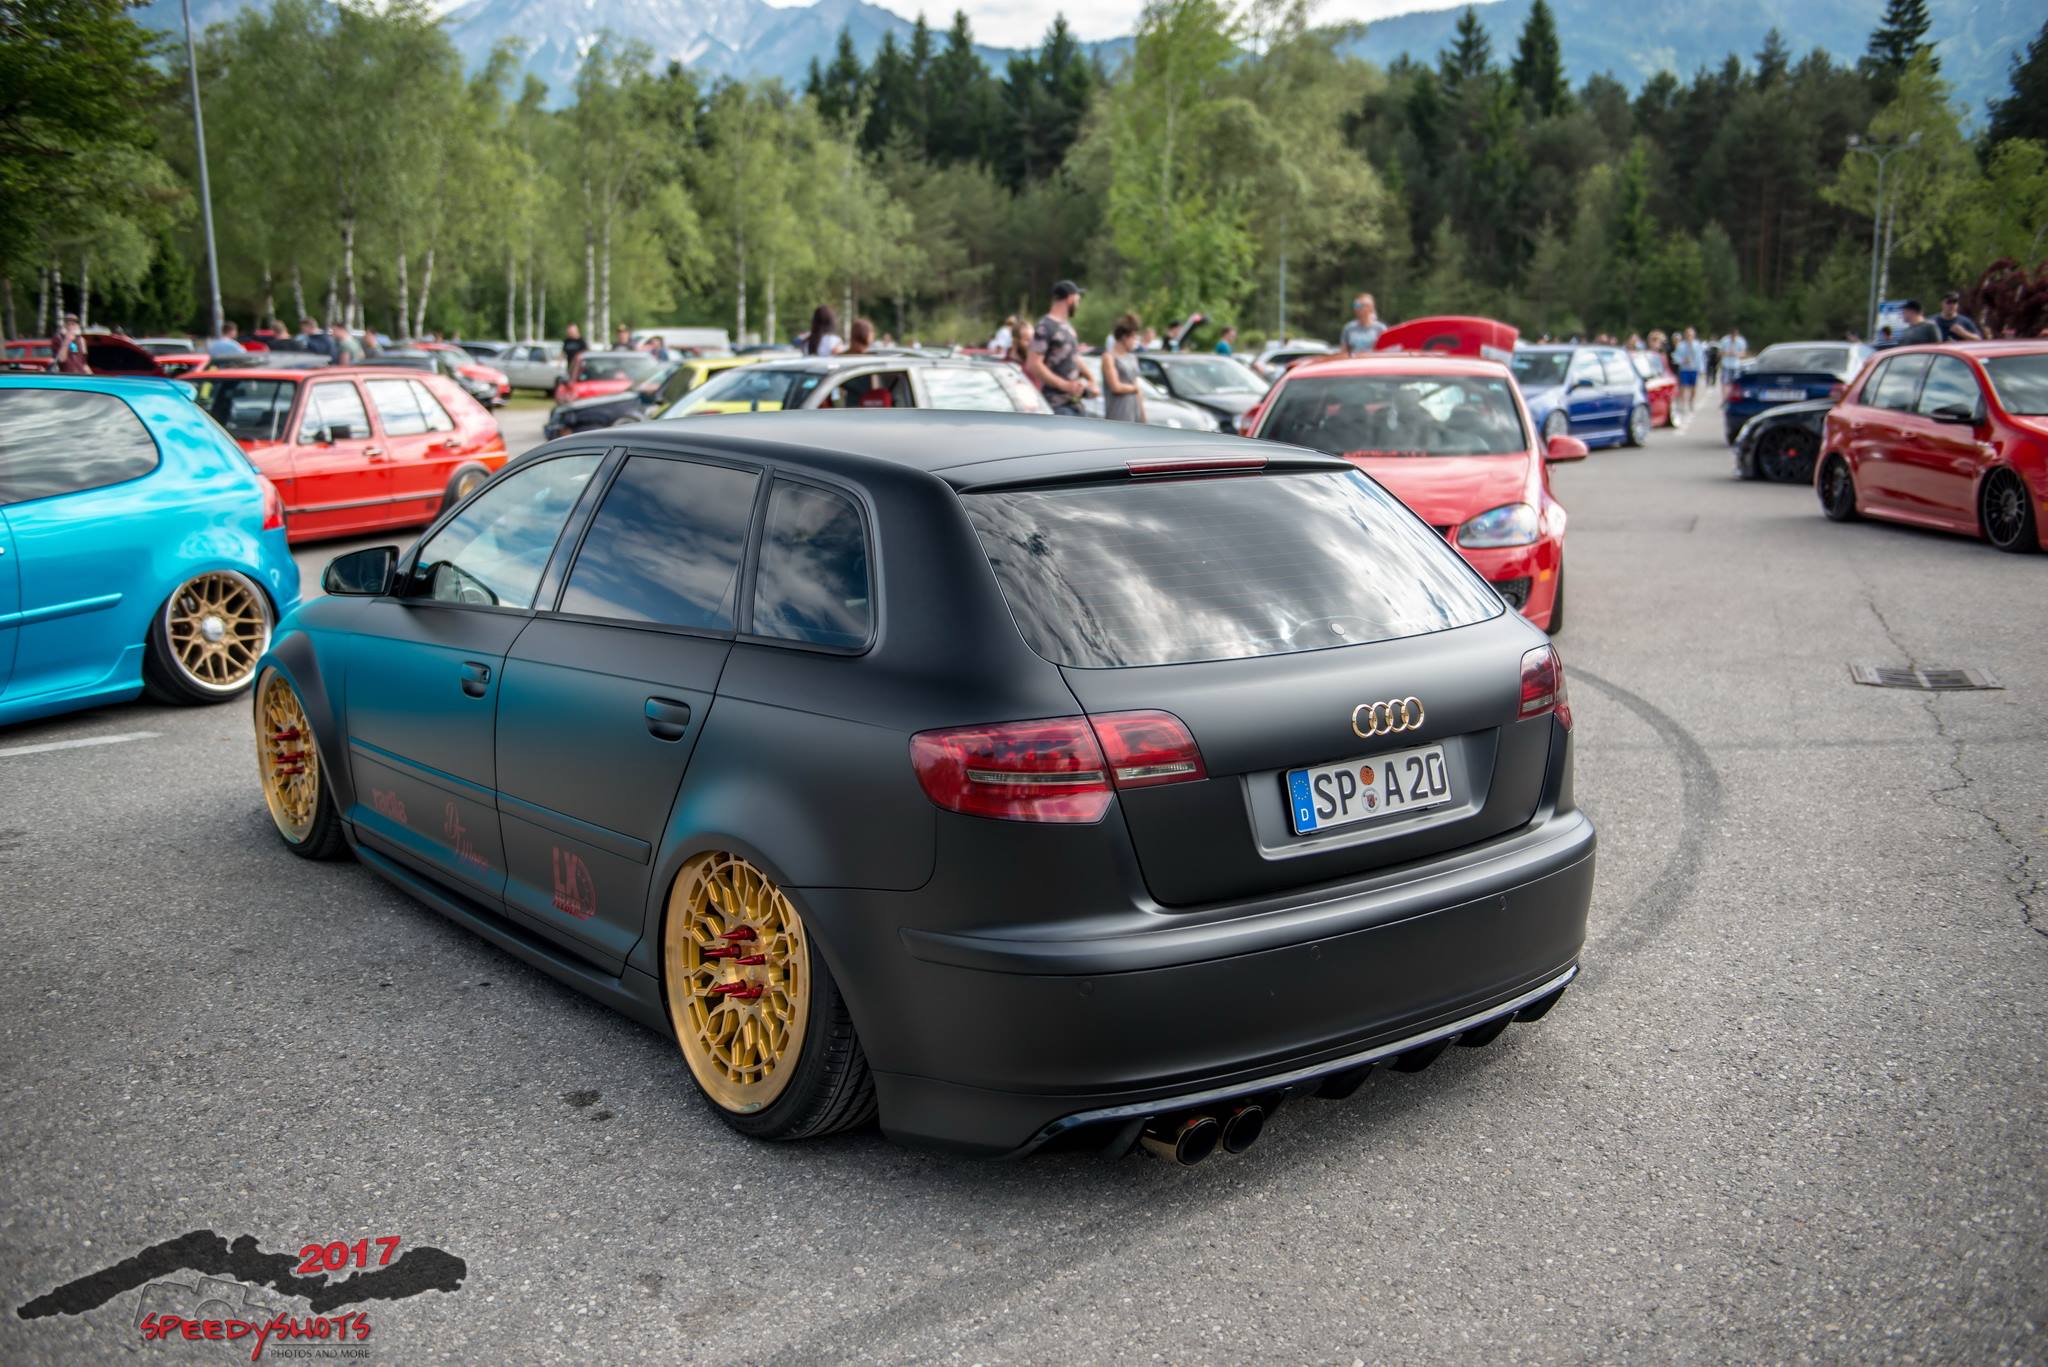 General 2048x1367 car tuning Audi colored wheels Audi A3 car meets station wagon German cars Volkswagen Group